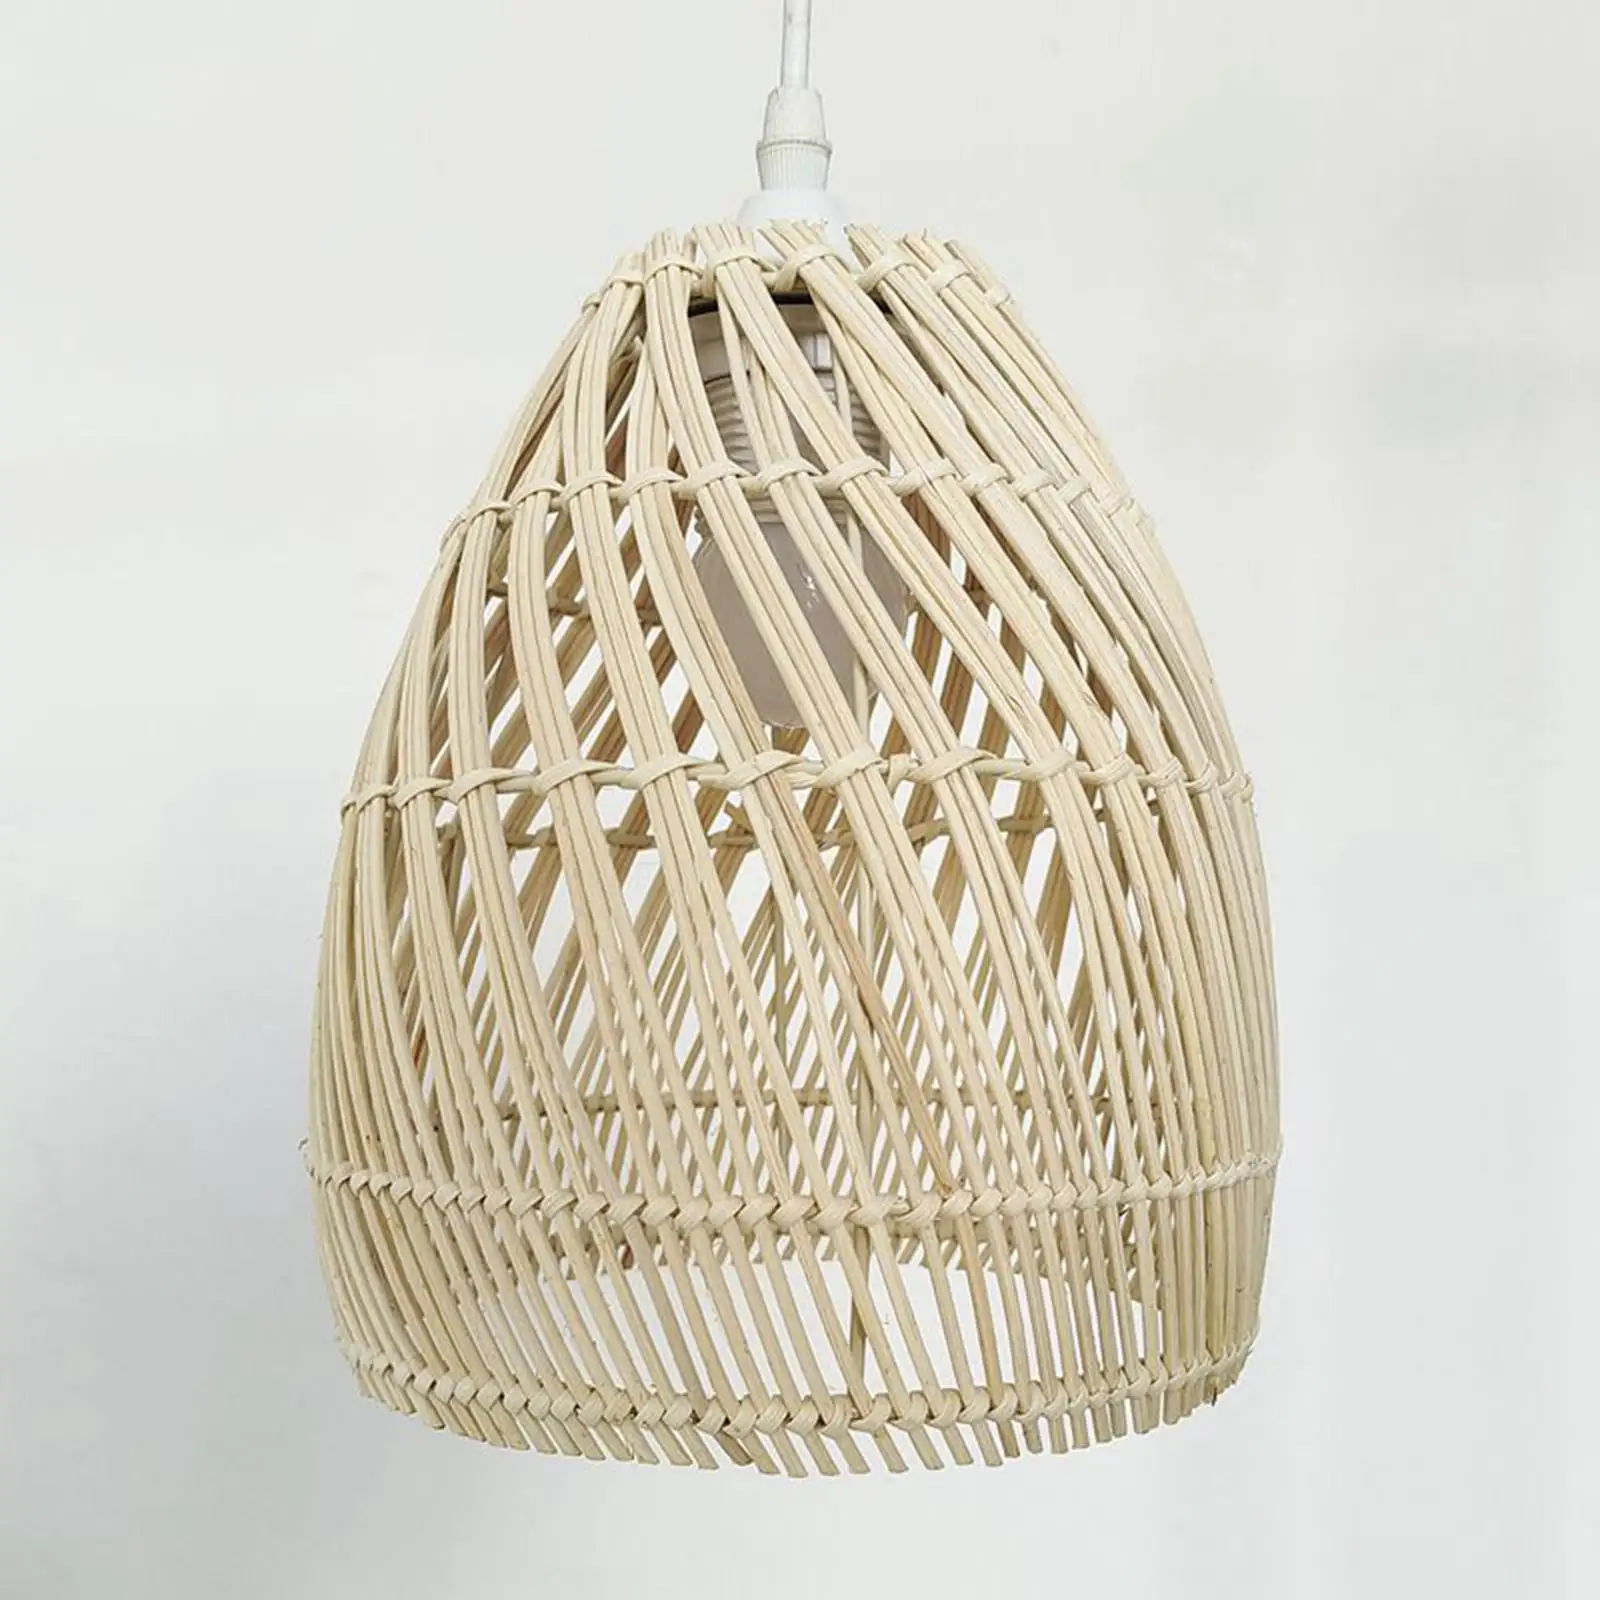 Ceiling Pendant Light Shade 1 Piece Retro Weaved Hanging Rustic Handmade Rattan Lampshade for Pendant Light, Teahouse Hotel Home